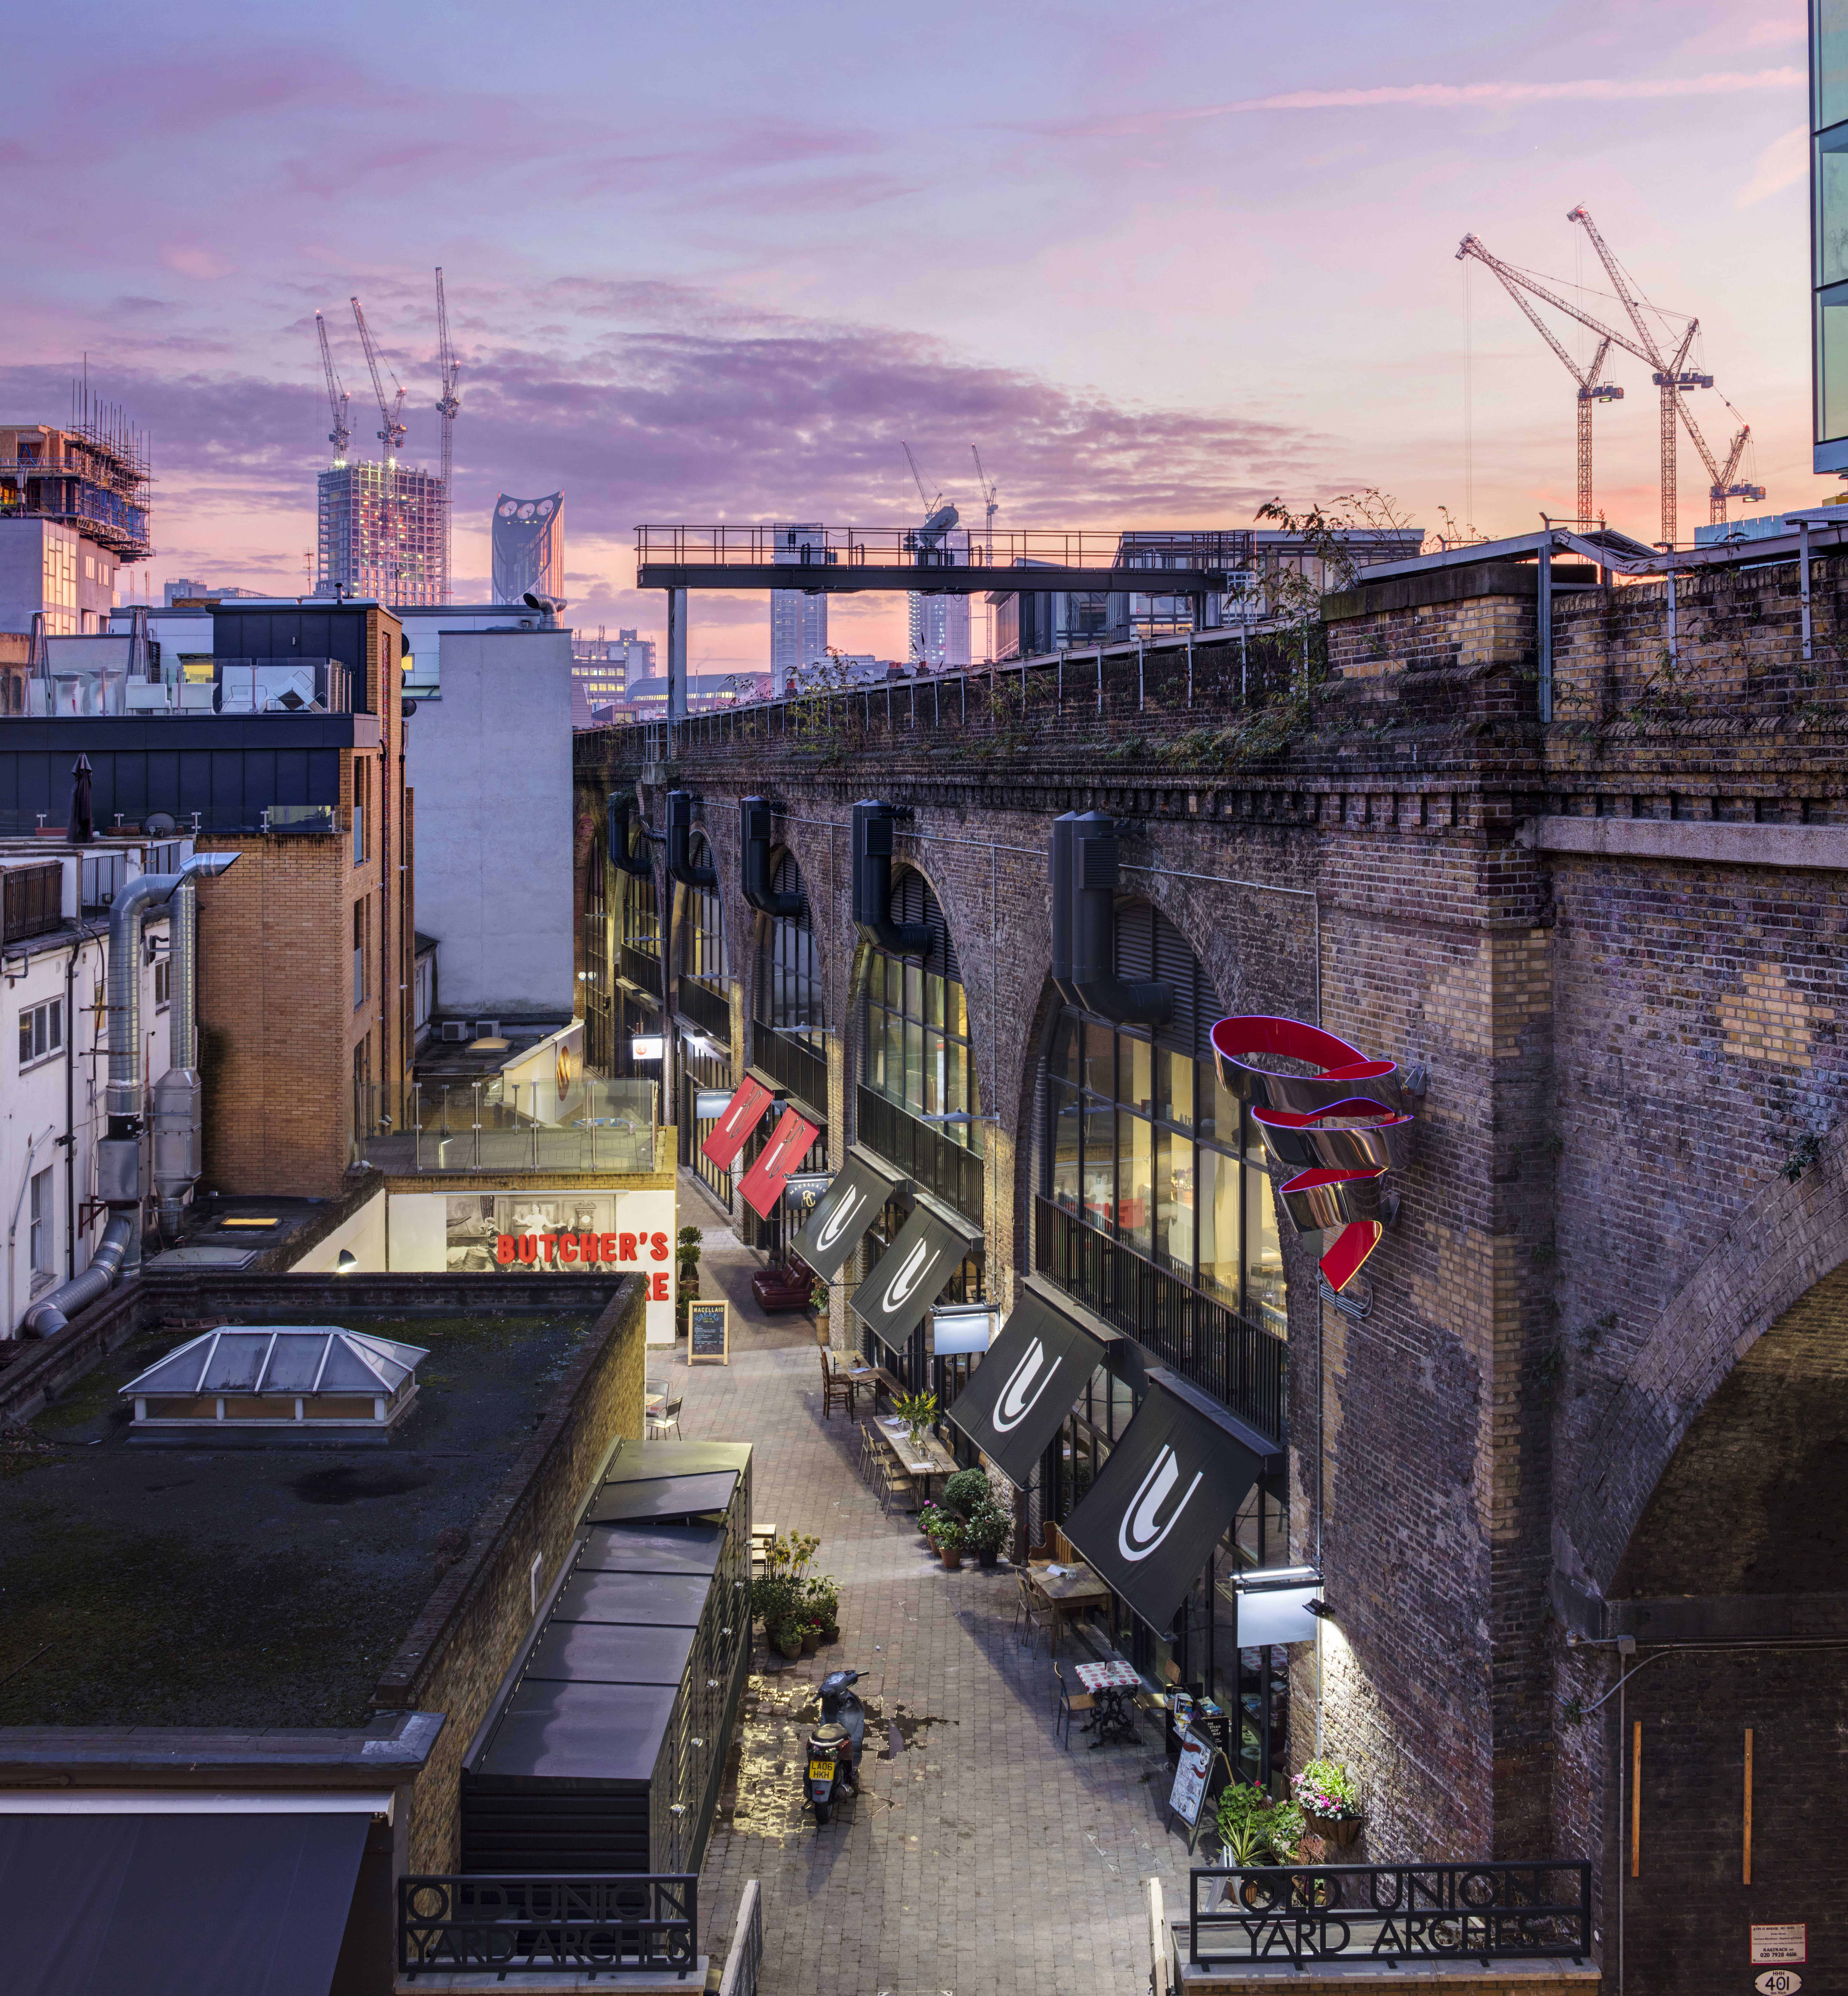 The Union Yard arches in Bankside is among the locations to get specially-designed music (Image: Adam Parker)